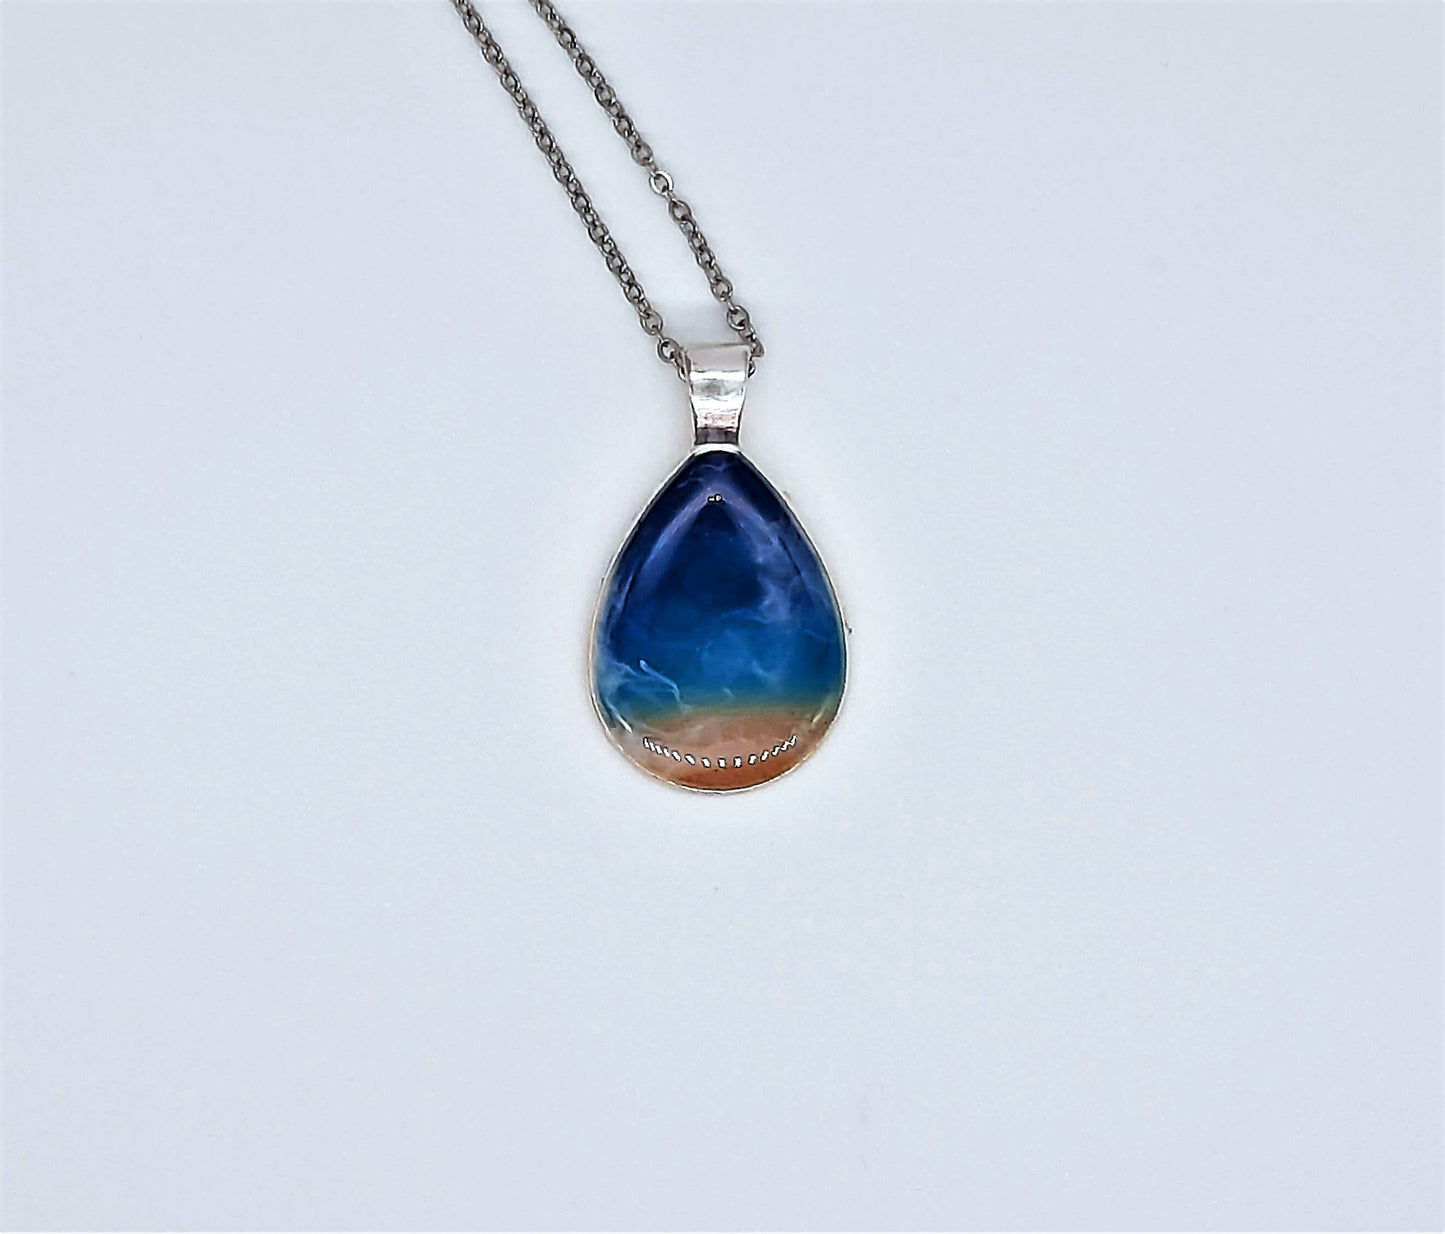 Resin Waves Teardrop Shaped Ocean Pendant / Beach Scene Necklace, Handmade with Resin and Real Sand - One of a Kind - Not a Photograph